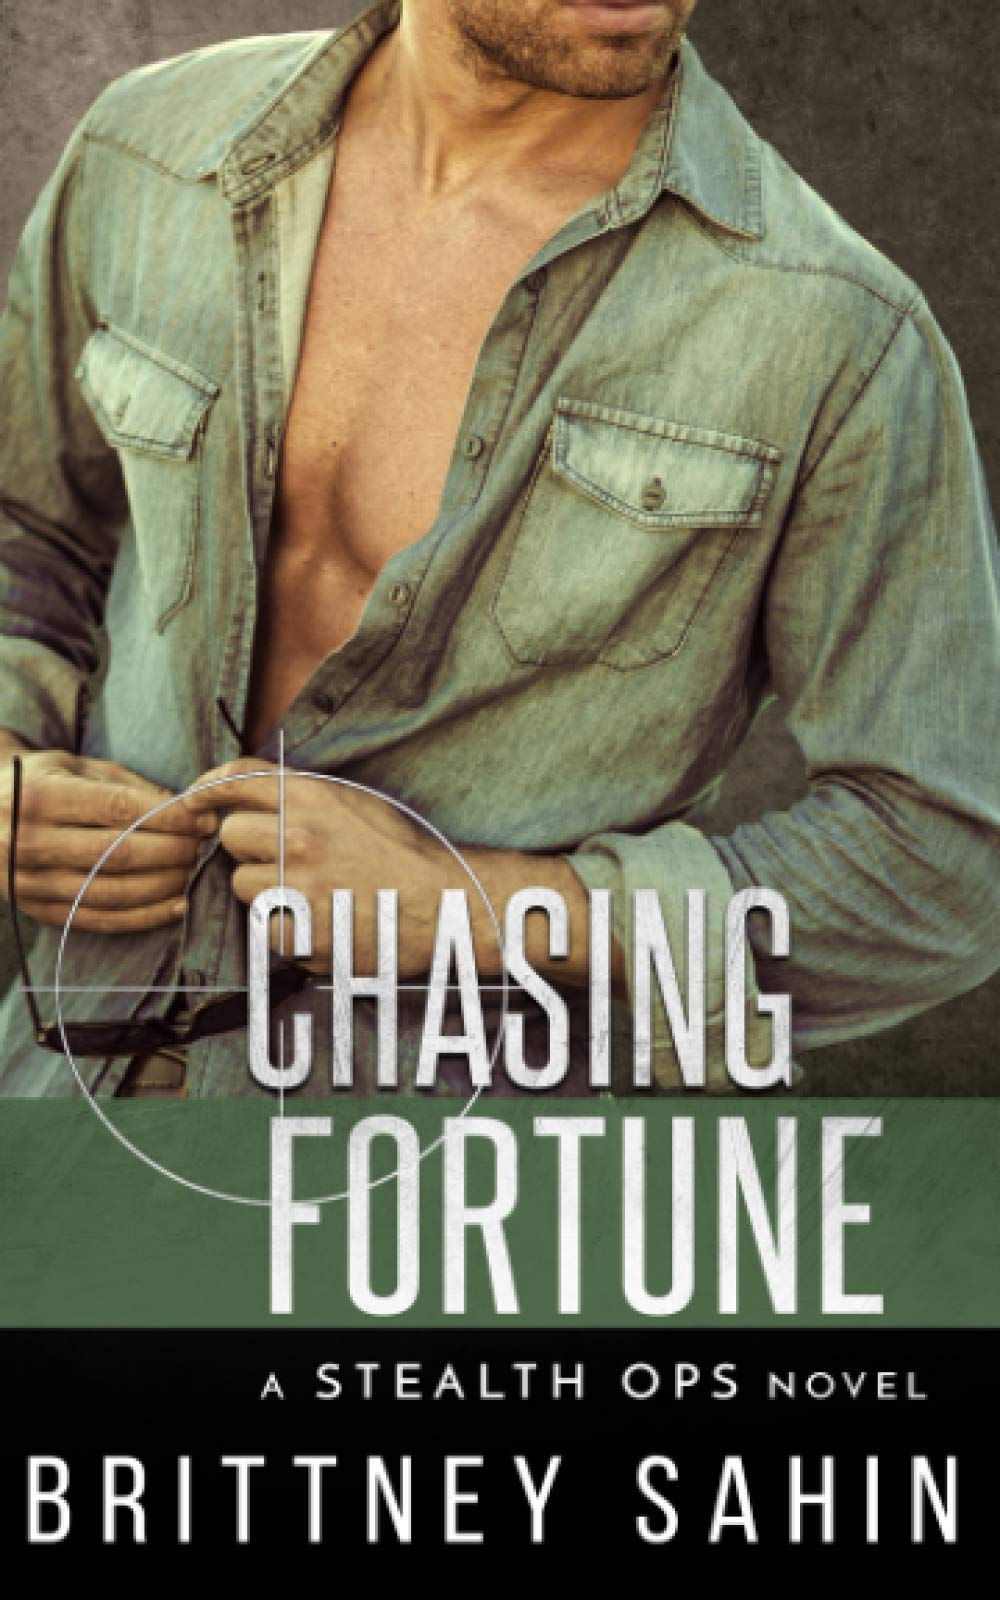 [EPUB] Stealth Ops #8 Chasing Fortune by Brittney Sahin